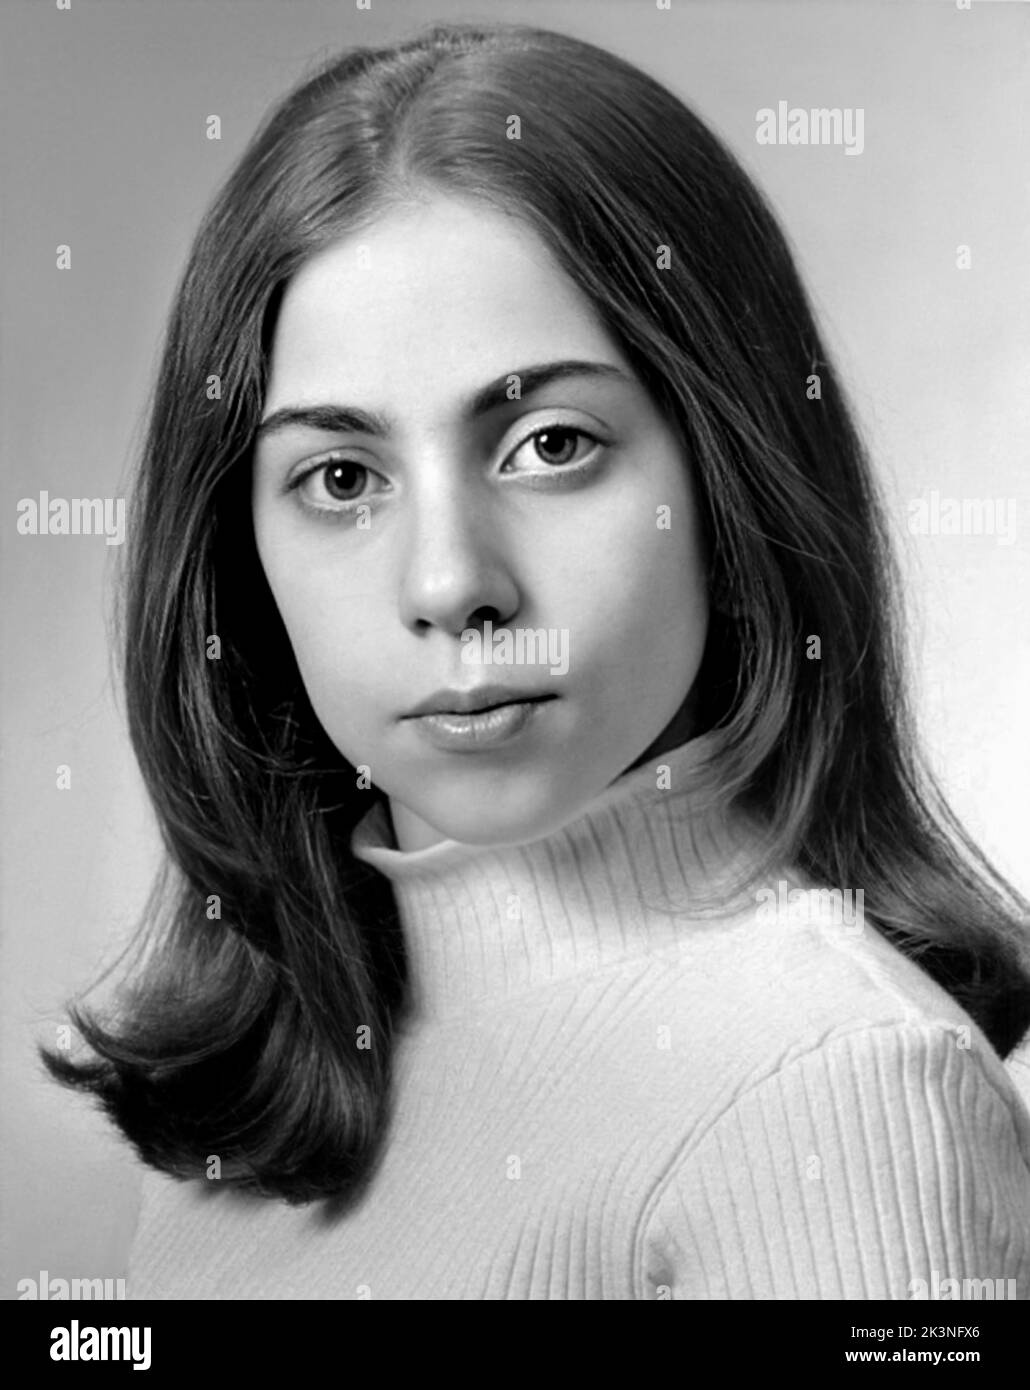 2000 , New York , USA : The celebrated american singer and actress LADY GAGA born JOANNE ANGELINA GERMANOTTA ( born 28 march 1986 ) when was a young girl aged 14 , photo from the annuary HIGH SCHOOL YEARBOOK . Unknown photographer .- HISTORY - FOTO STORICHE - ATTORE - MOVIE - CINEMA - SEX SYMBOL - personalità da bambino bambini bambina da giovane - personality personalities when was young - INFANZIA - CHILDHOOD - TEENAGER  - POP MUSIC - MUSICA - cantante  - PORTRAIT - RITRATTO --- ARCHIVIO GBB Stock Photo